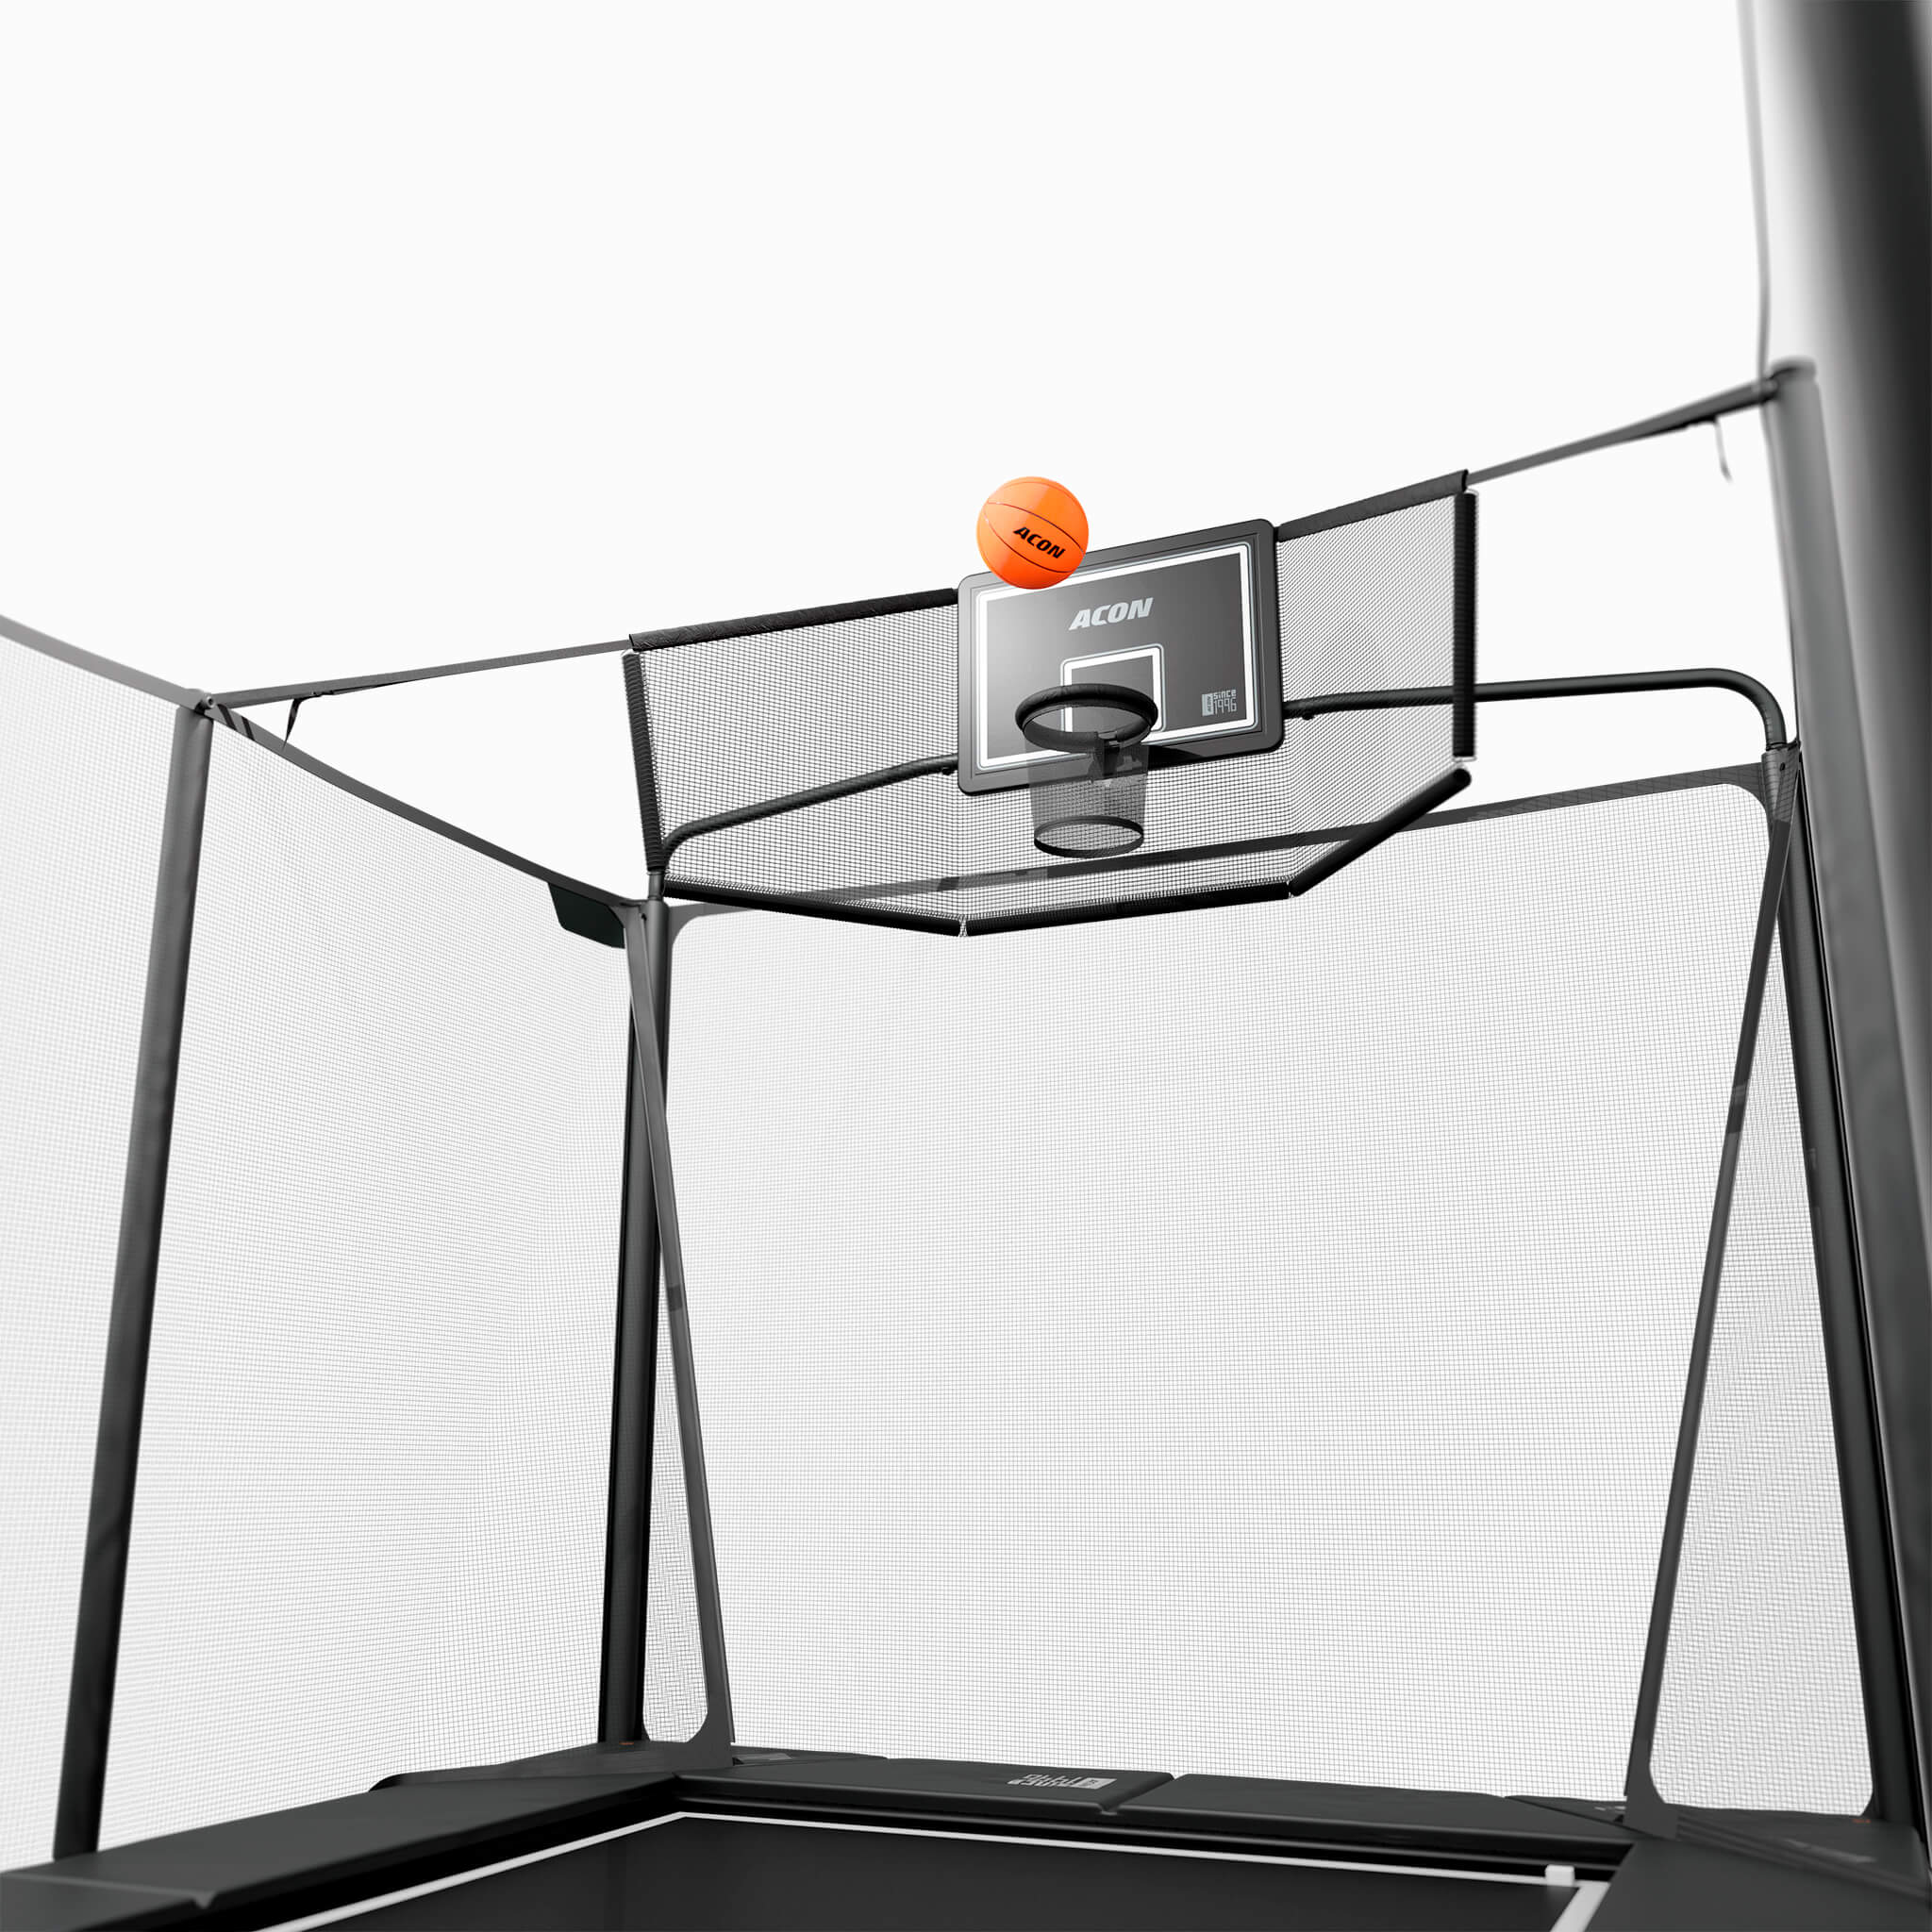 Detail of Acon X Hoop and Back Net assembled on the trampoline, basketball flying.